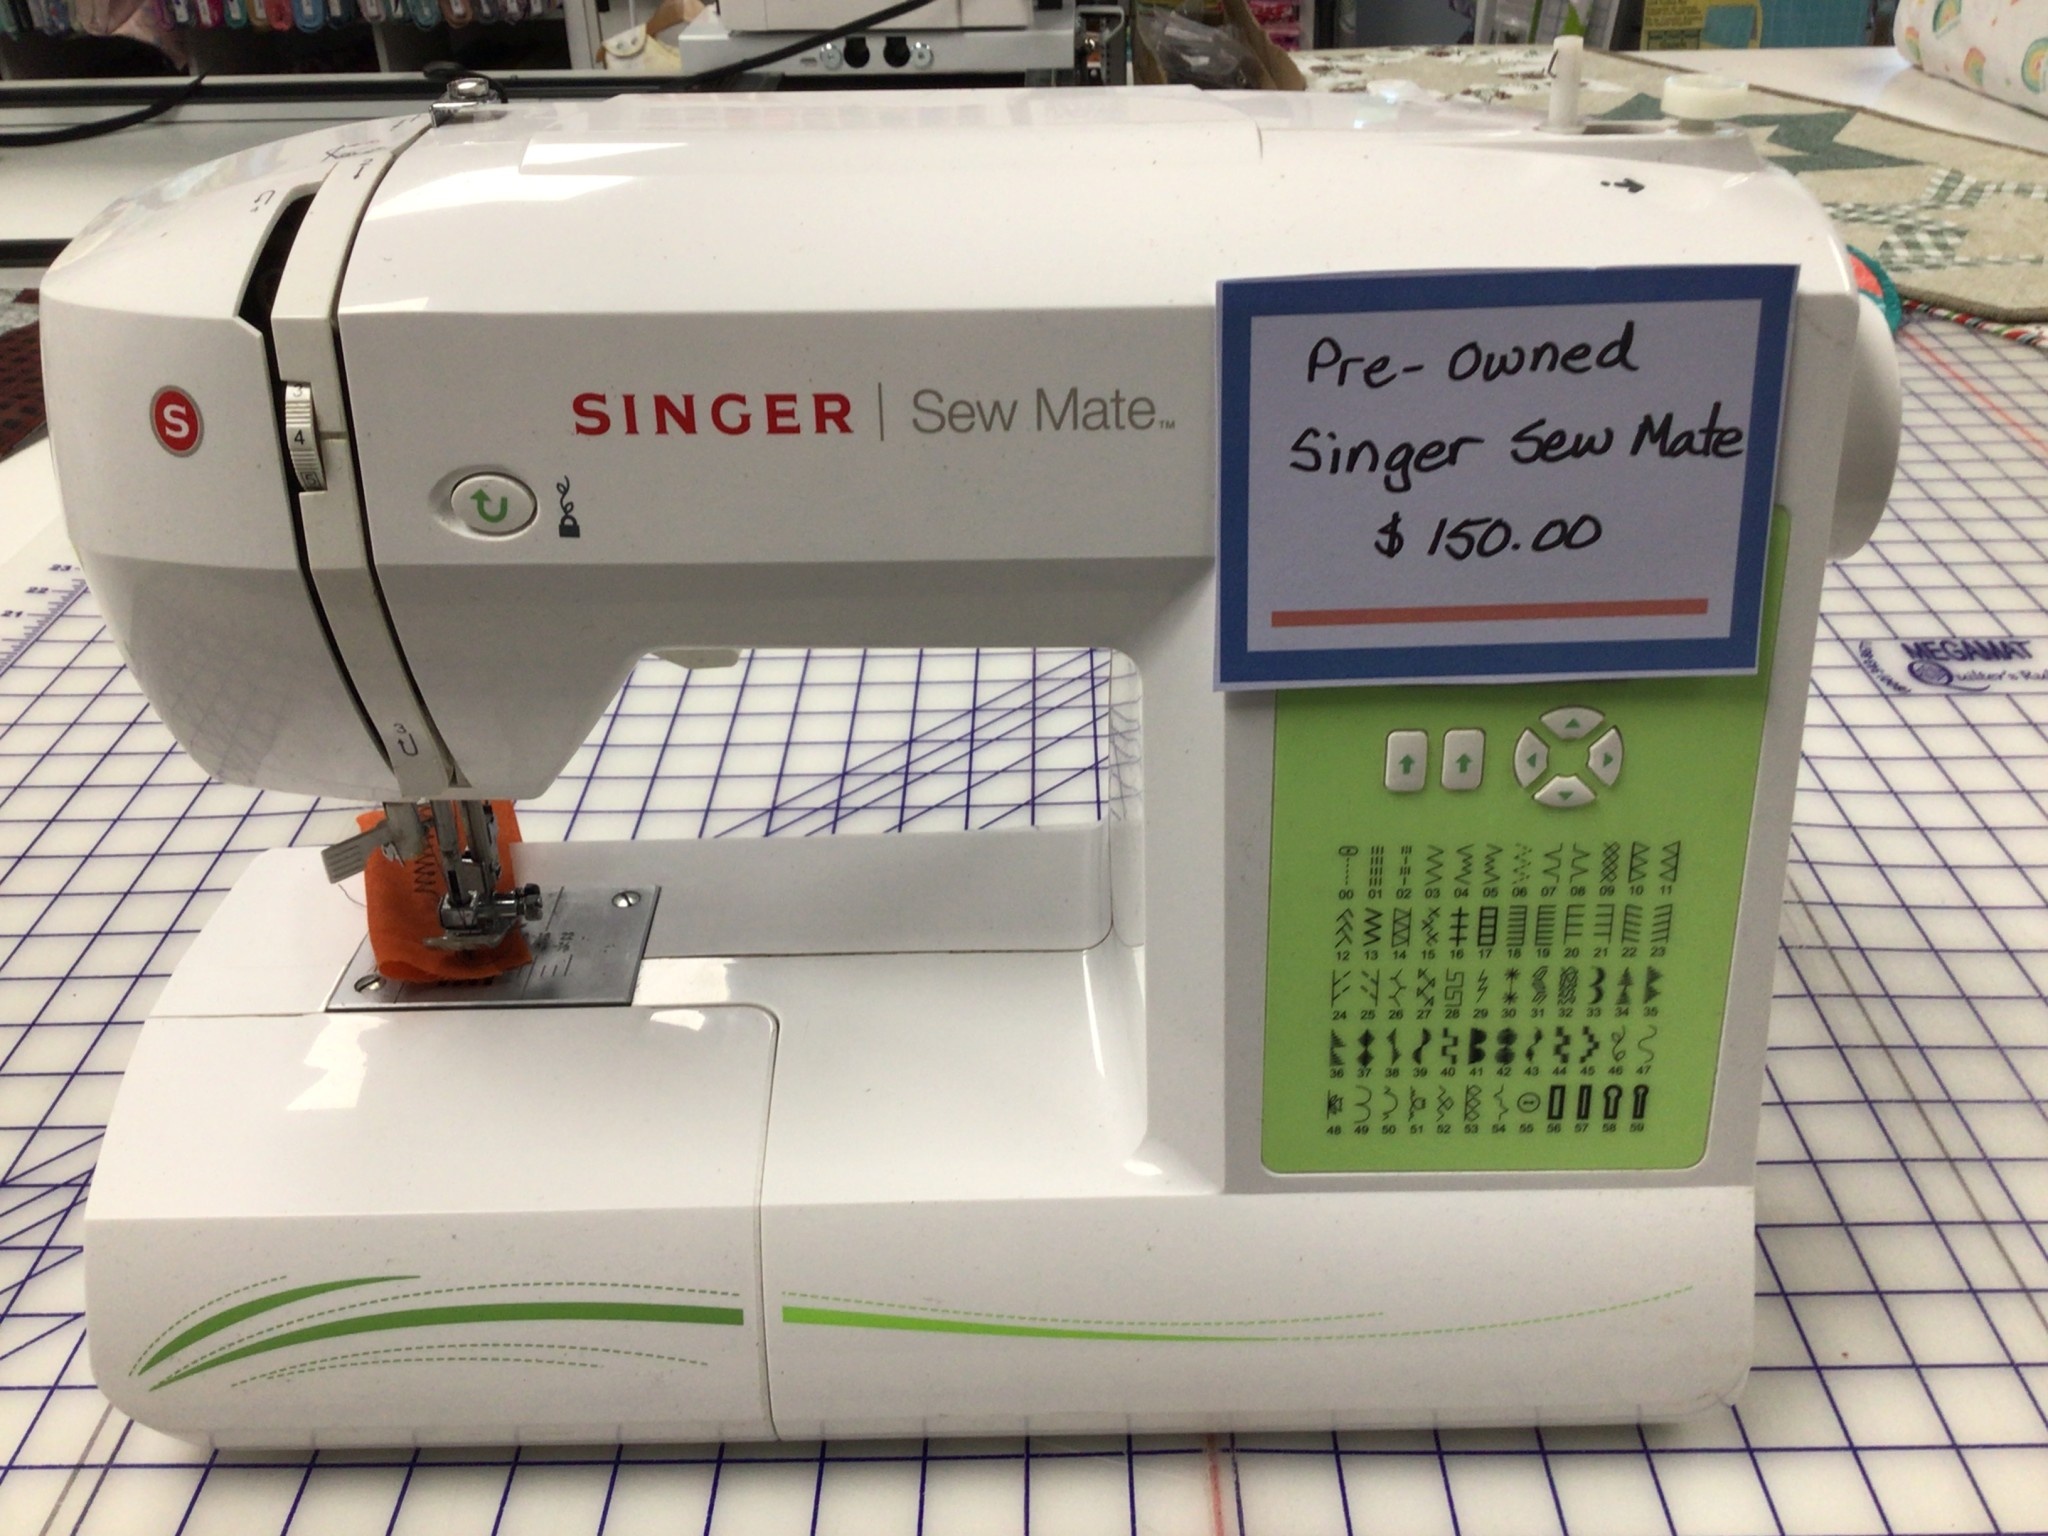 Pre-Owned Singer Sew Mate - Dominion Sewing Centre & Studio